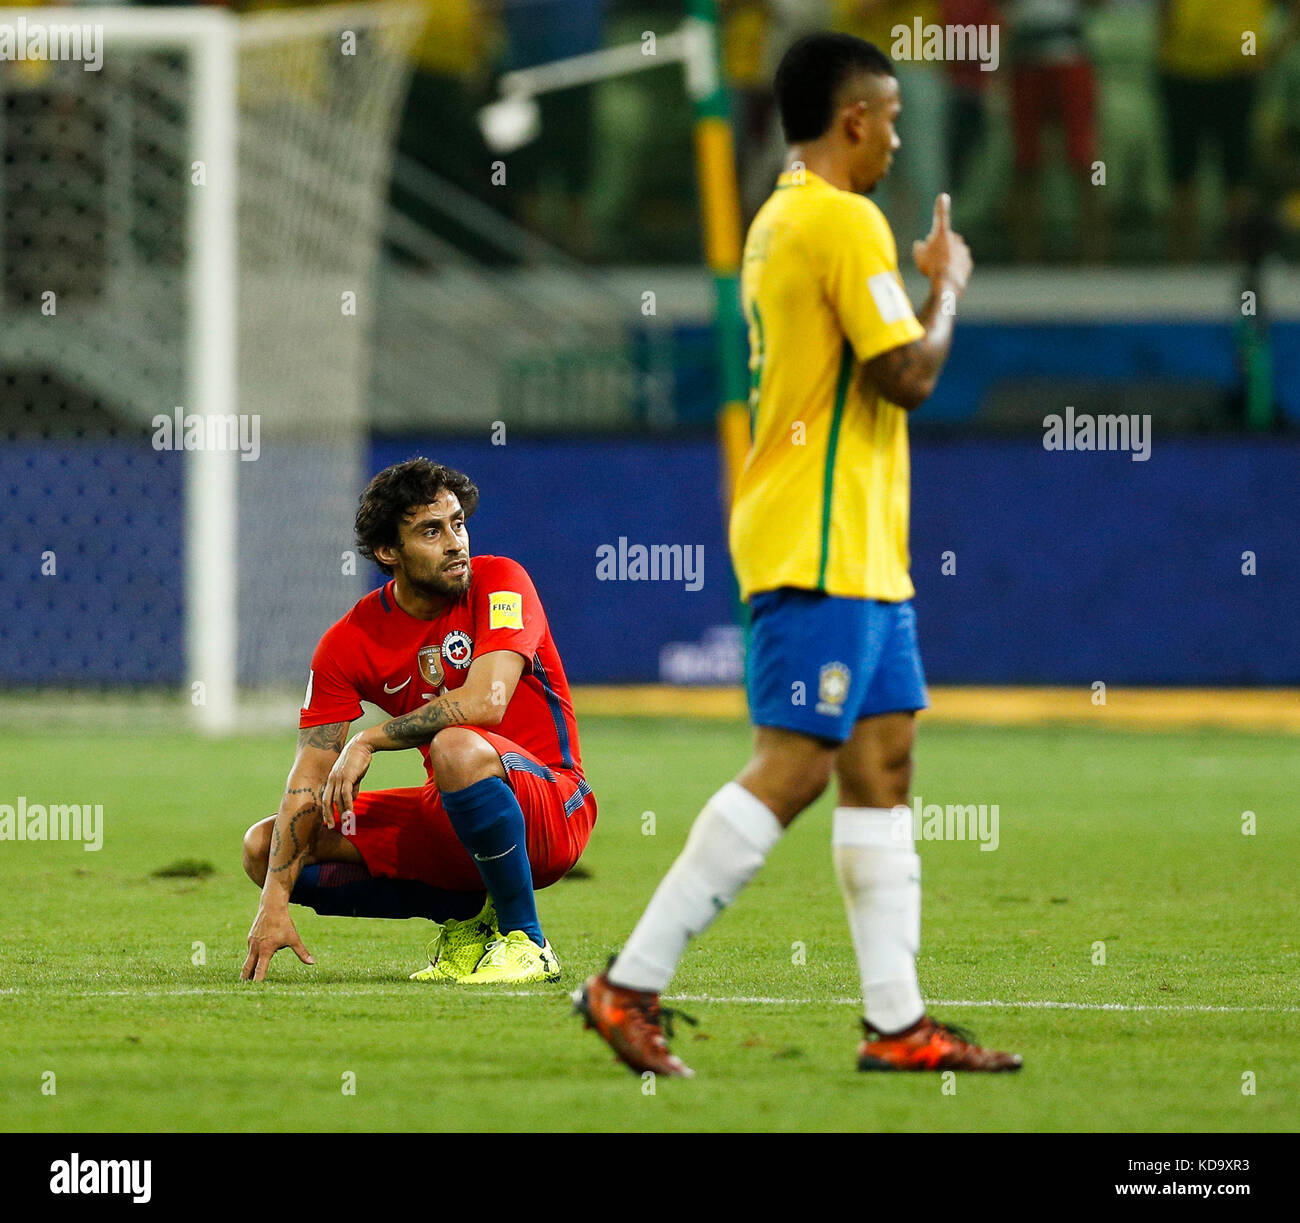 SÃO PAULO, SP - 10.10.2017: BRASIL X CHILE - Jorge Valdivia of Chile during a match between Brazil and Chile valid for the last round of the World Cup Qualifiers Russia 2018, held at Allianz Parque in the neighborhood of Barra Funda, west of the capital. (Photo: Marcelo Machado de Melo/Fotoarena) Stock Photo